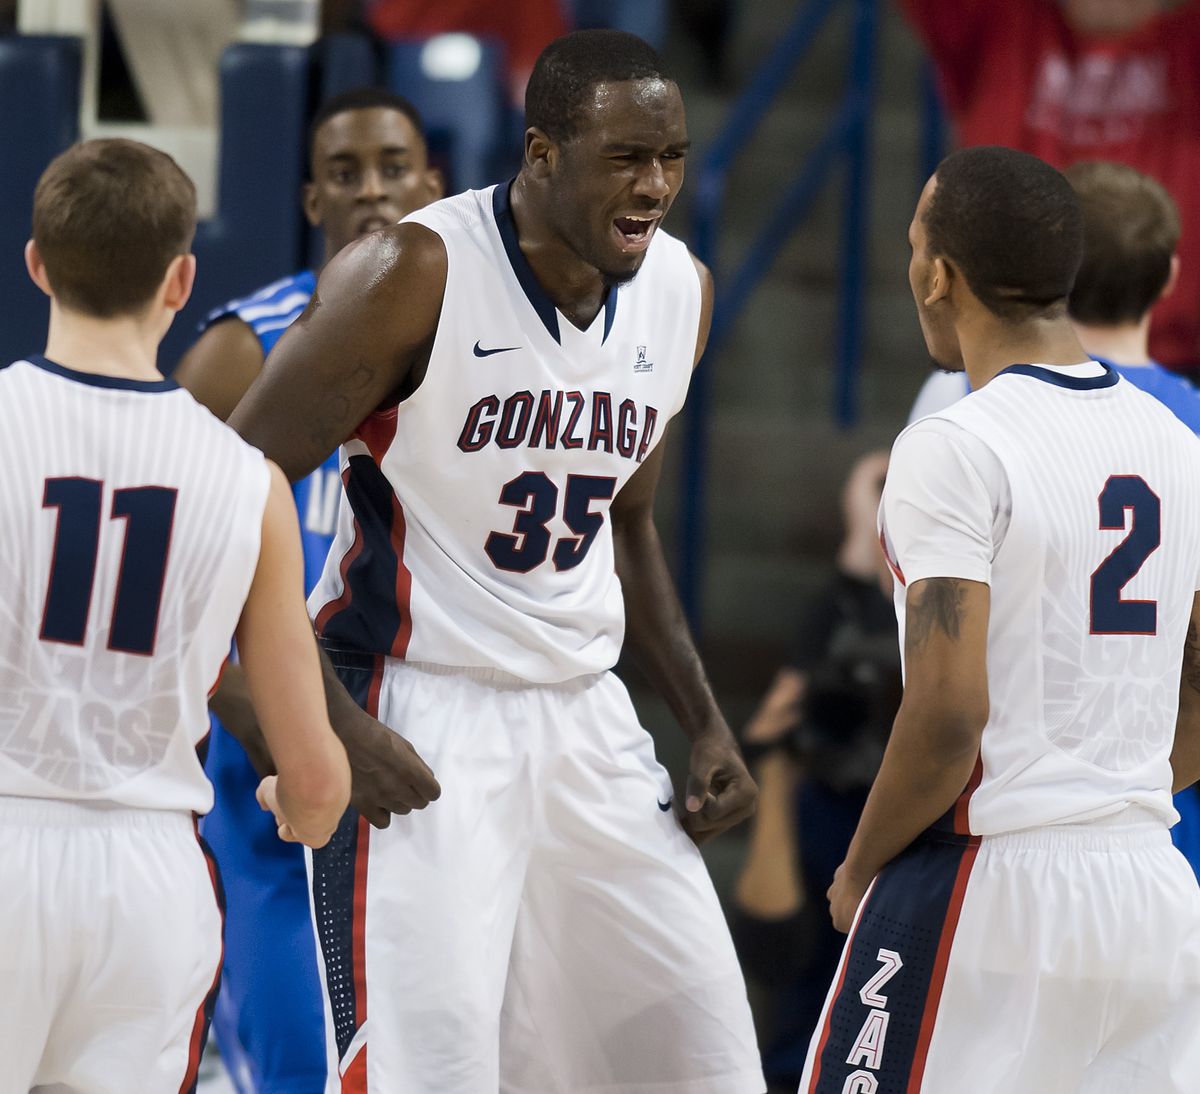 Sam Dower gives Gonzaga a solid third option against rival posts. (Colin Mulvany)